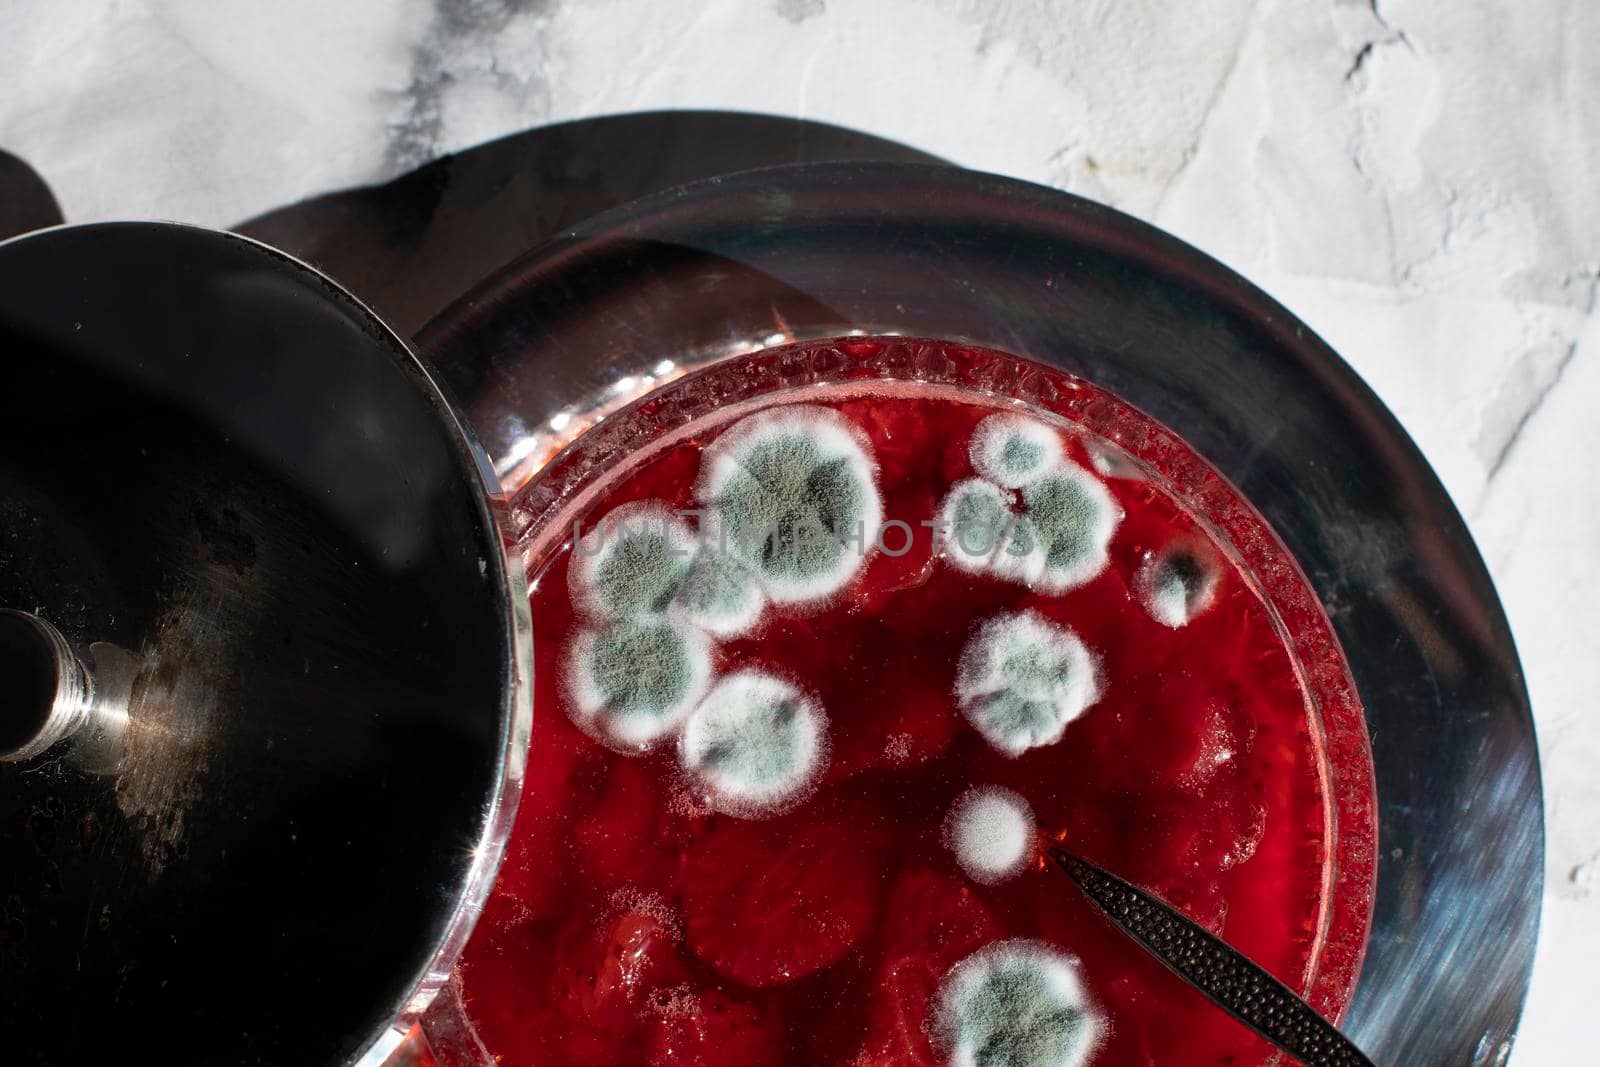 blue mold on strawberry jam, violation of cooking technology, health hazard, spoiled product, beautiful blue spots on a red background. High quality photo